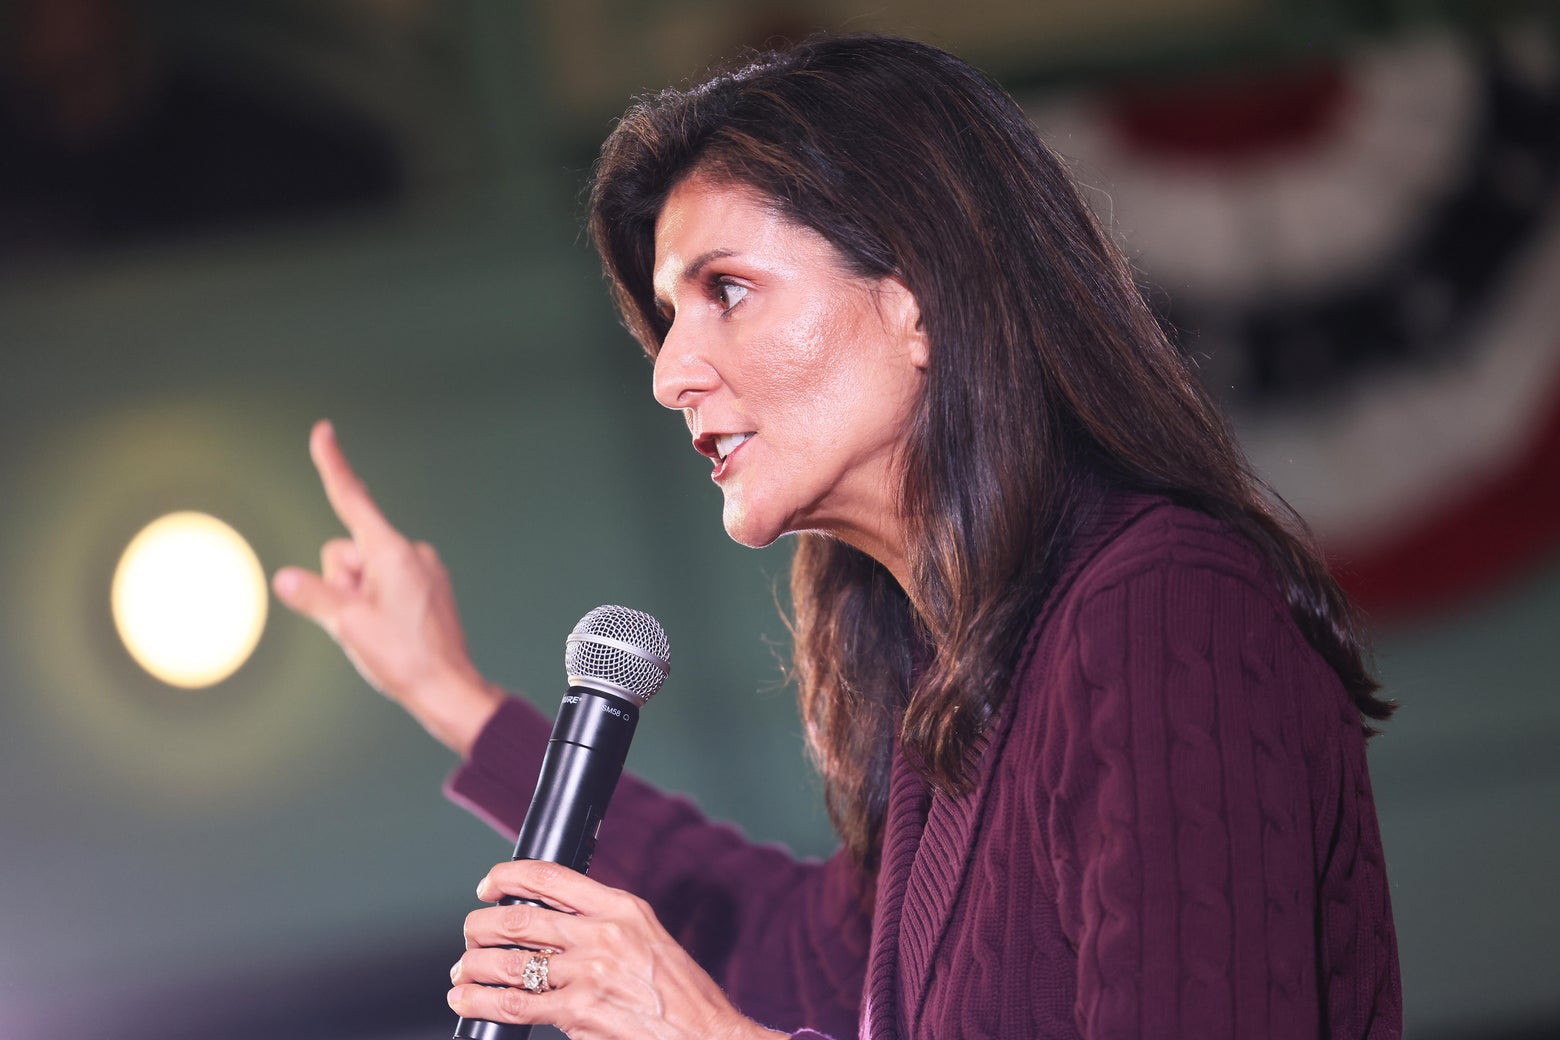 Nikki Haley Wants Mandatory Competency Tests for Older Politicians. Here’s What the Experts Say.